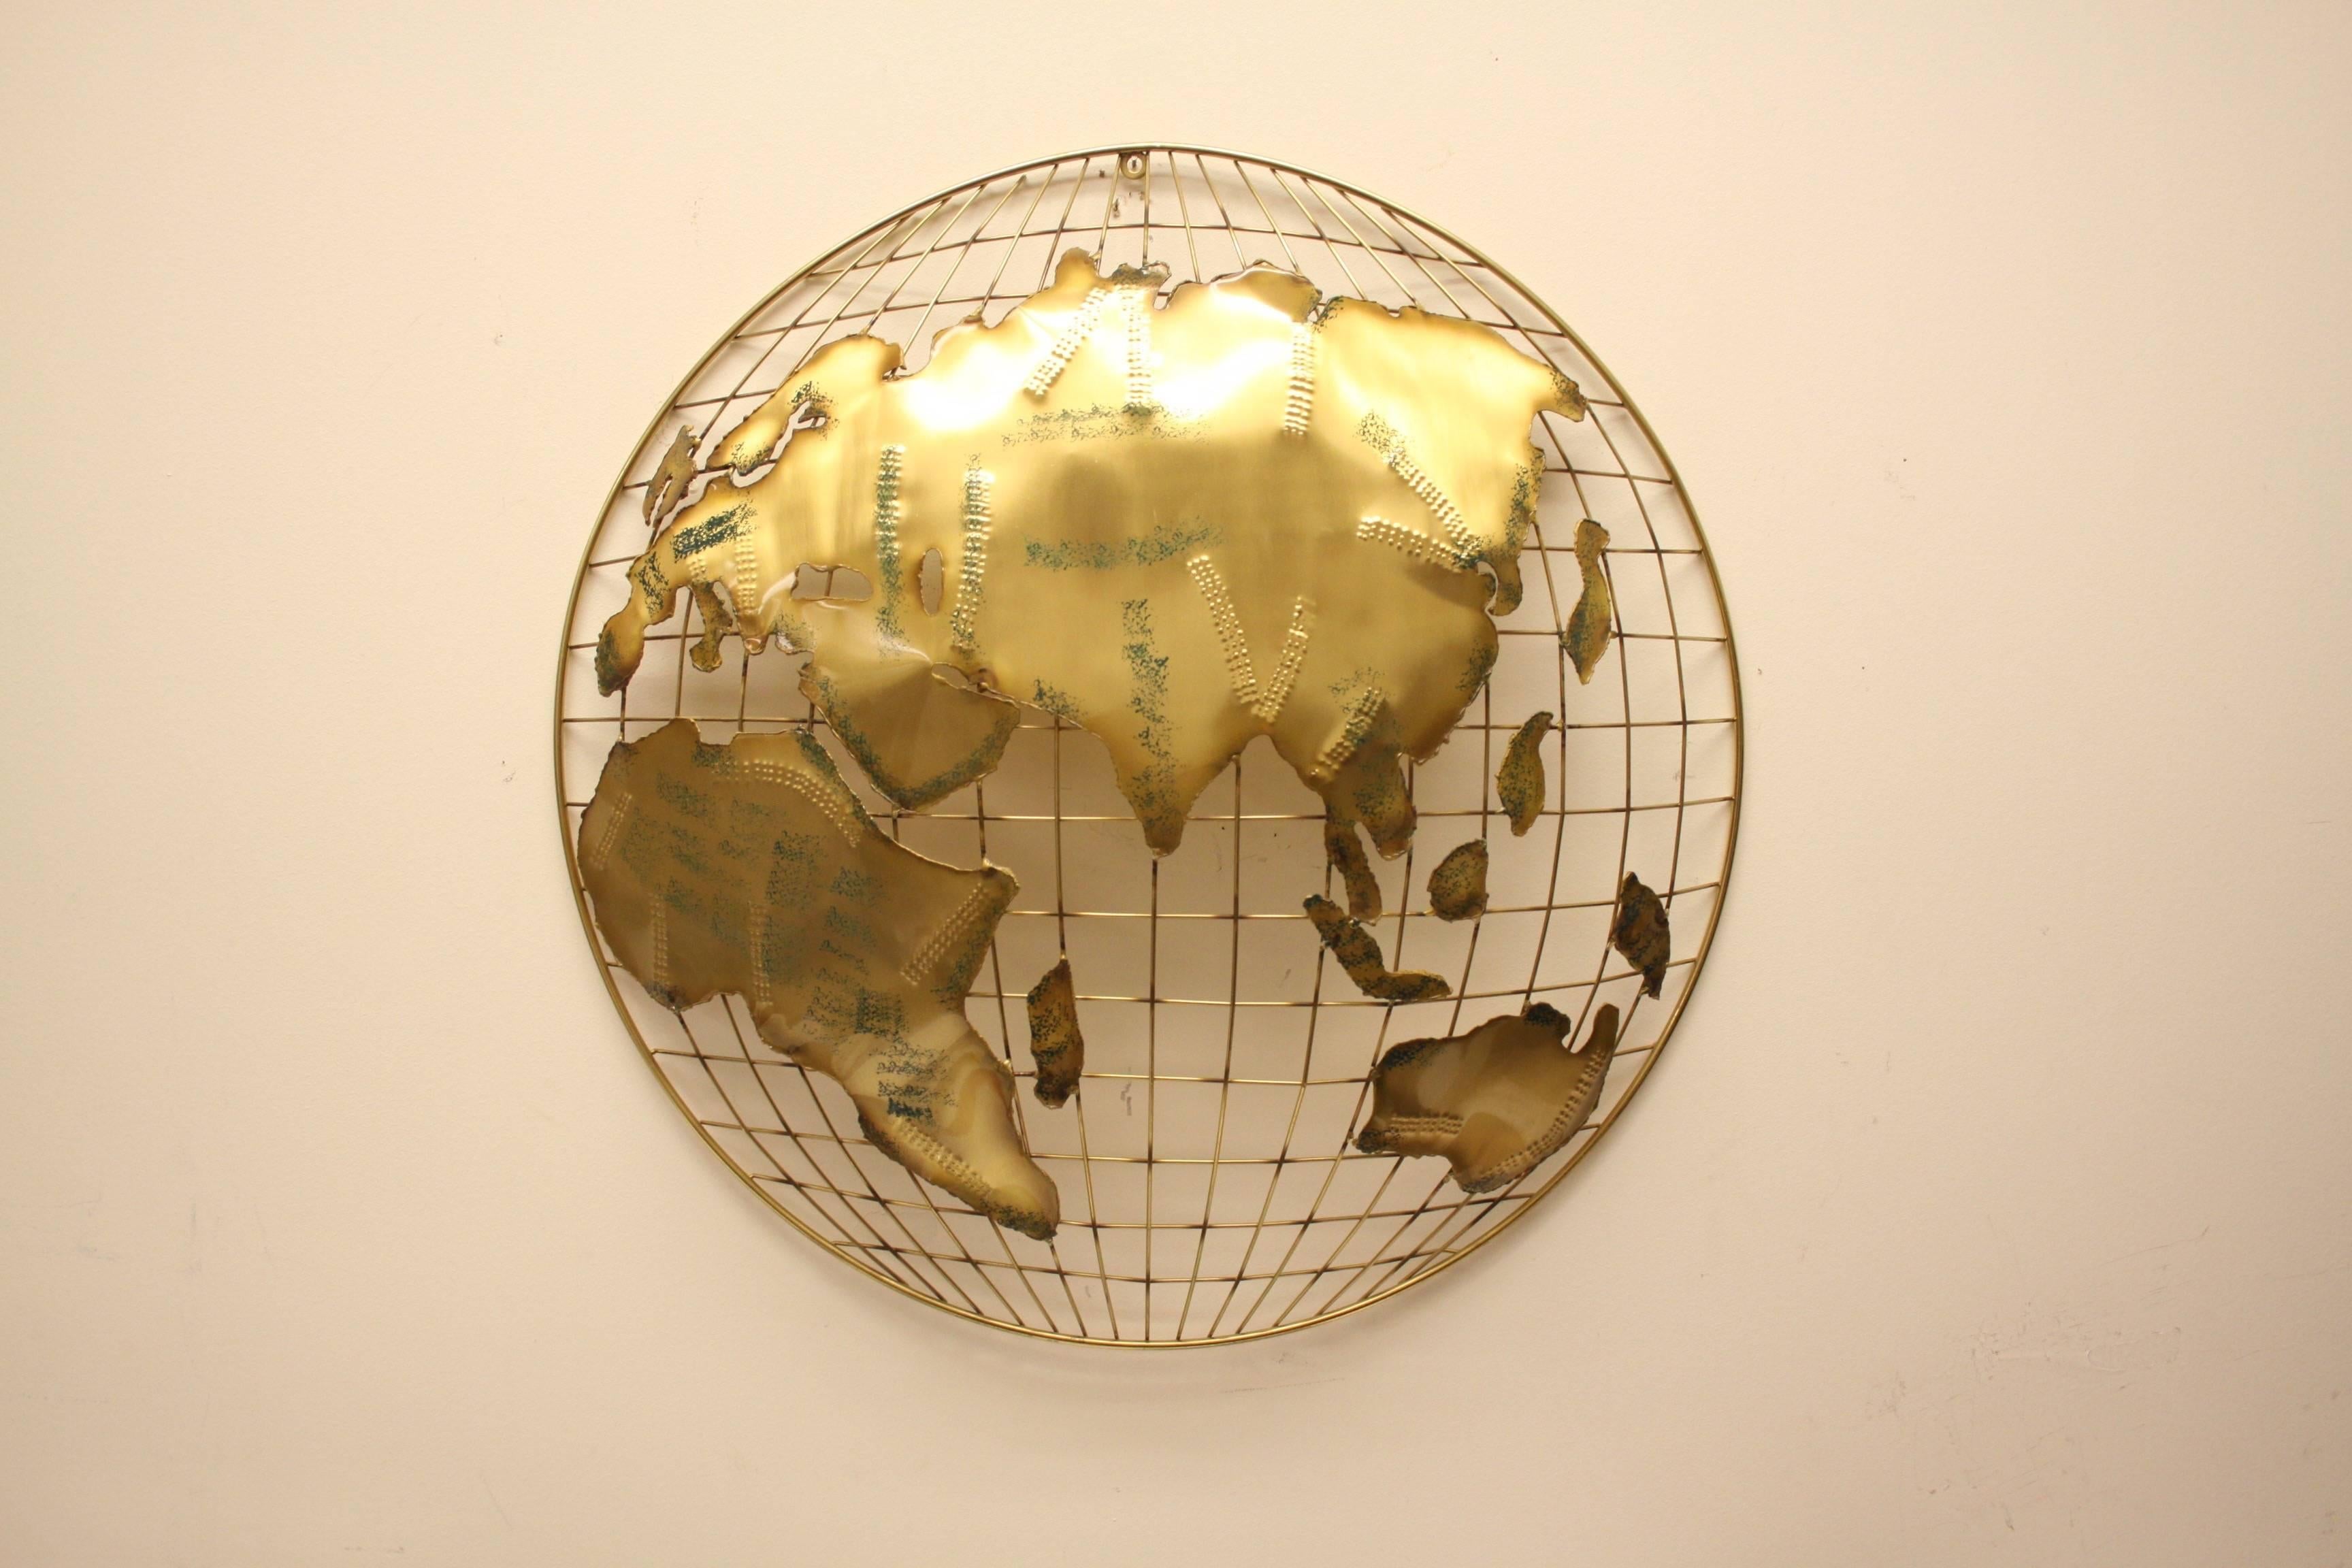 Pair of C. Jere Brass Globe Sphere Wall Sculptures, circa 1984 For Sale 4